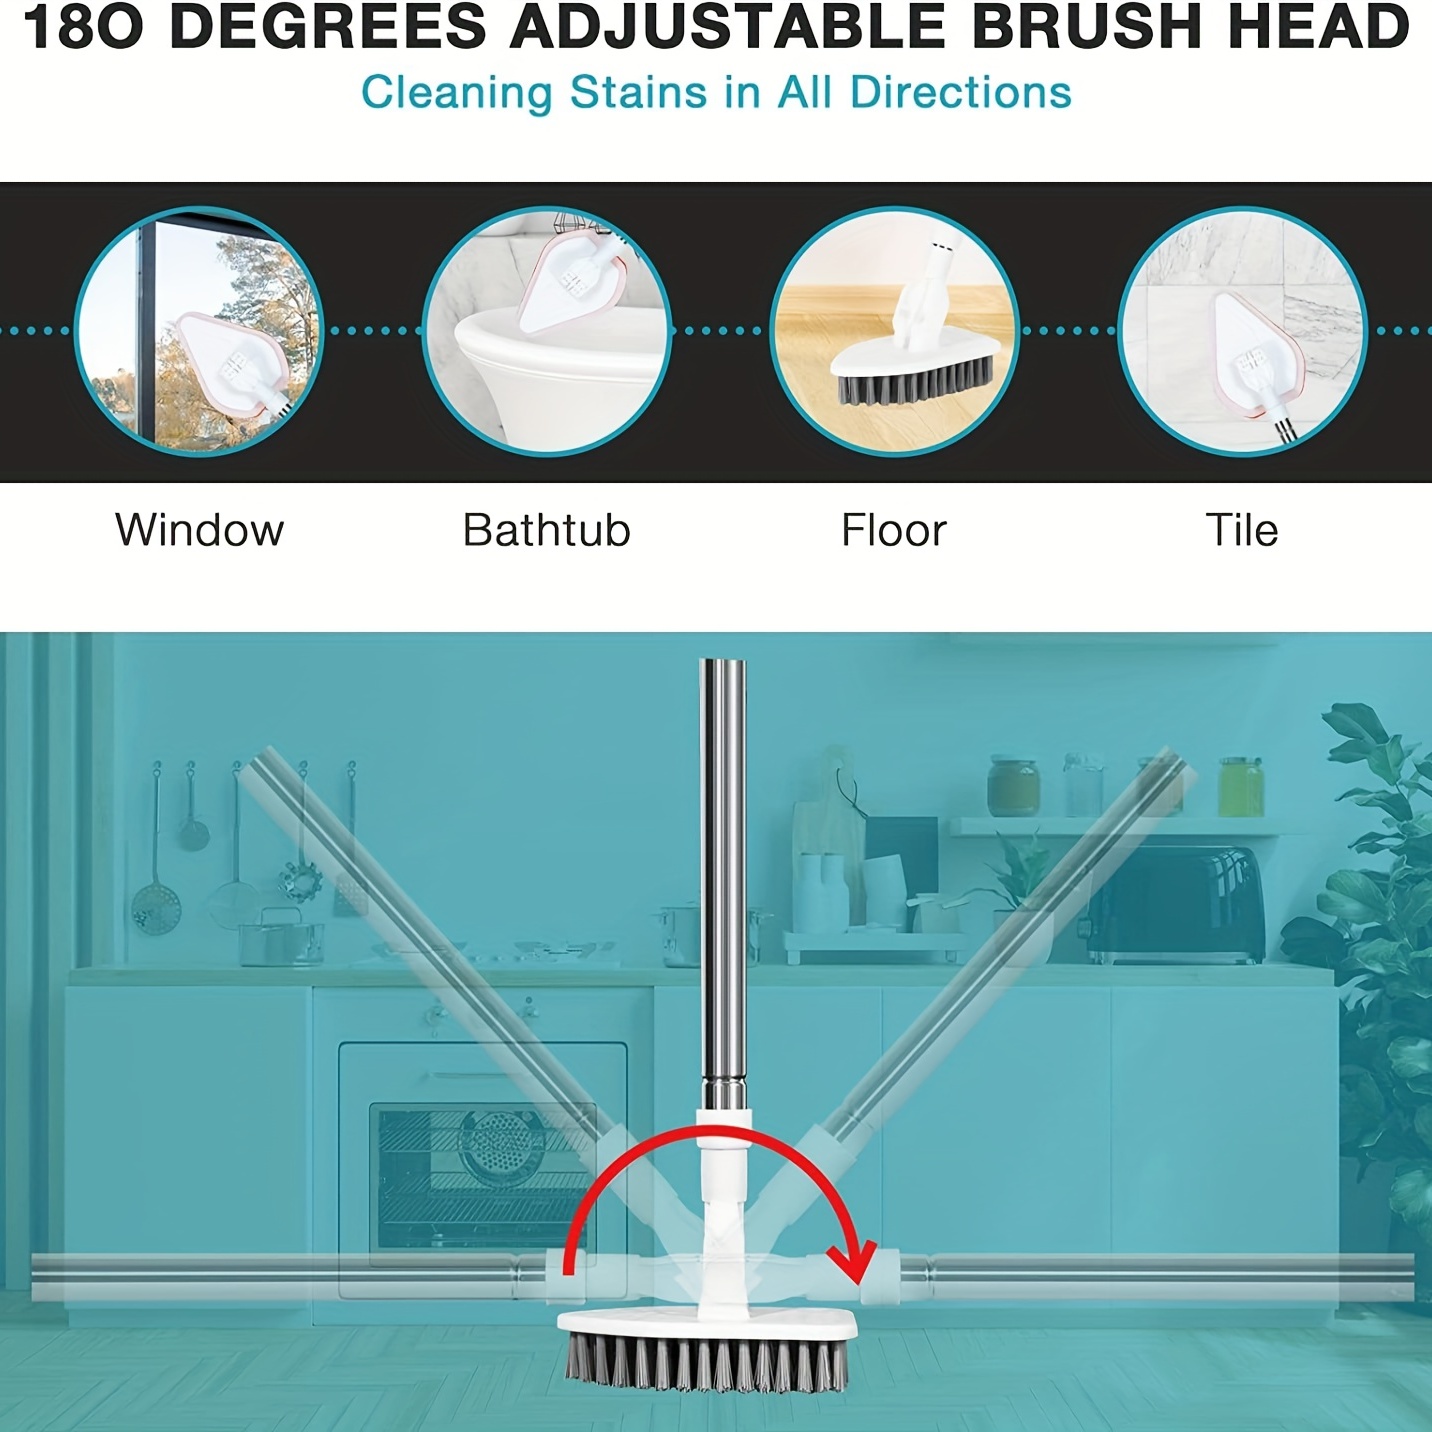 2-In-1 Shower Cleaning Brush with 46'' Long Handle, Fixable Shower Scrubber  for Cleaning, Flexible Long Handled Scrub Brush for Shower/Bathroom, Non